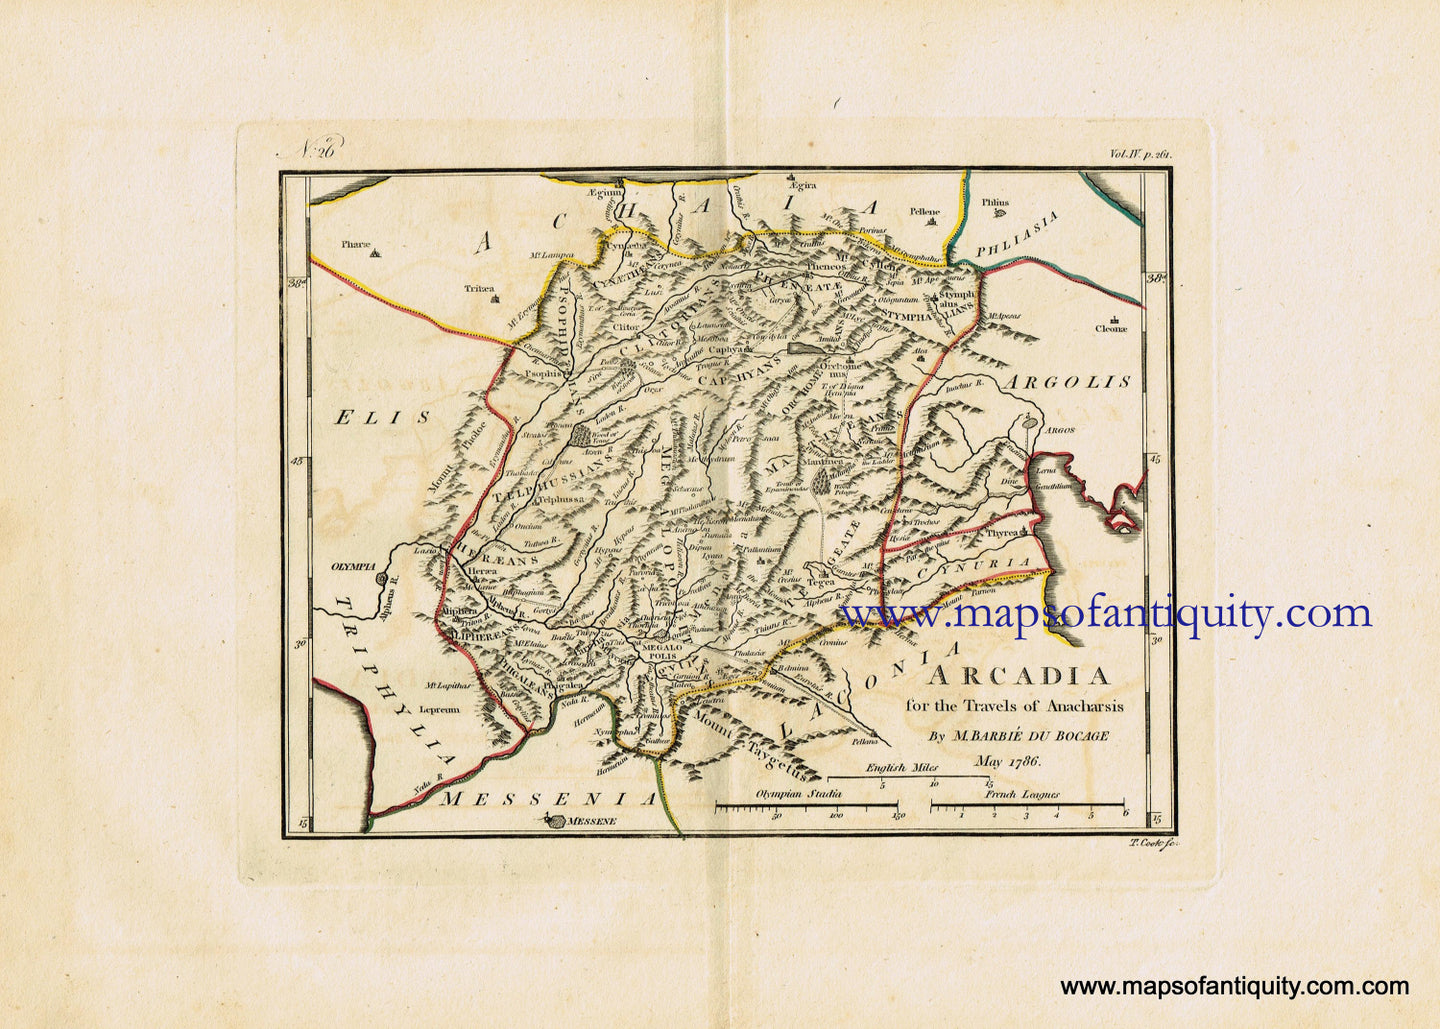 Antique-Hand-Colored-Map-Arcadia-Greece-Europe-Greece-1791-Barbie-du-Bocage-Maps-Of-Antiquity